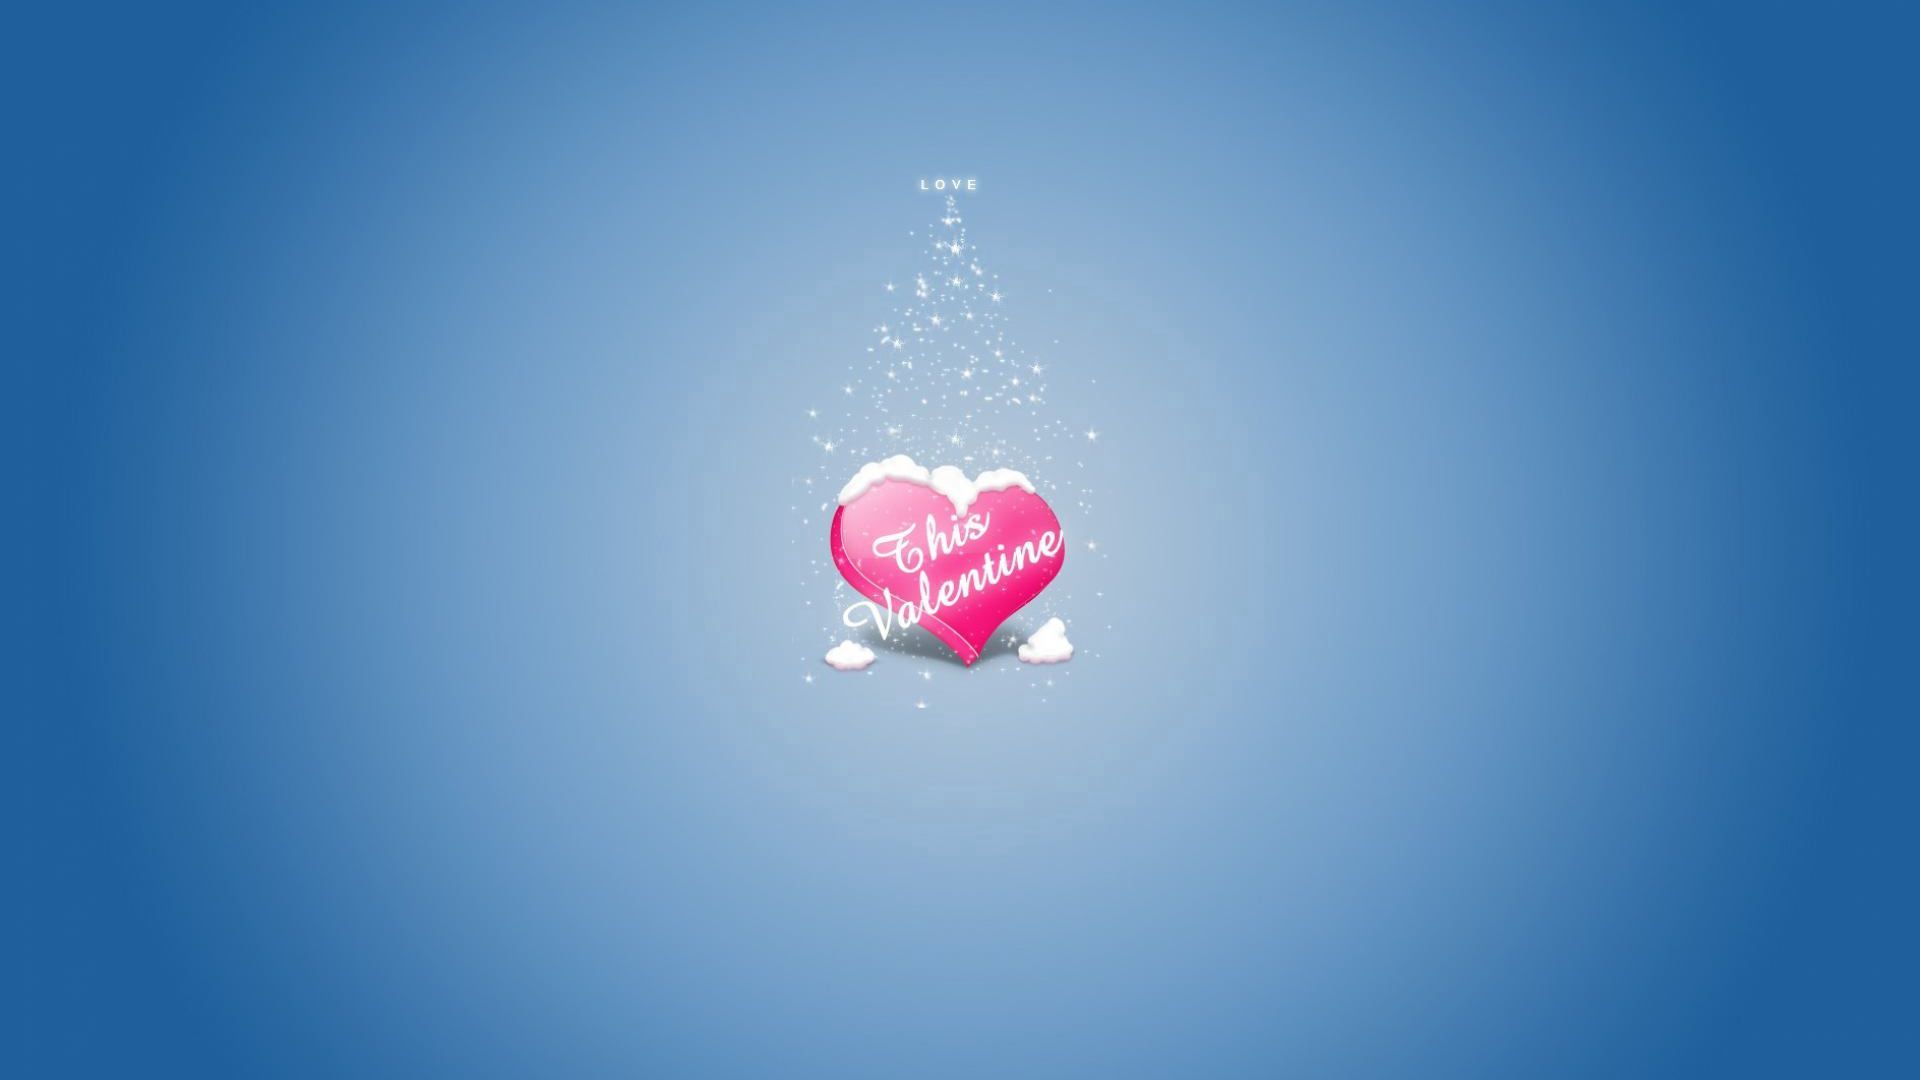 Download wallpaper 1920x1080 heart, snow, blue, valentines day full hd, hdtv, fhd, 1080p HD background